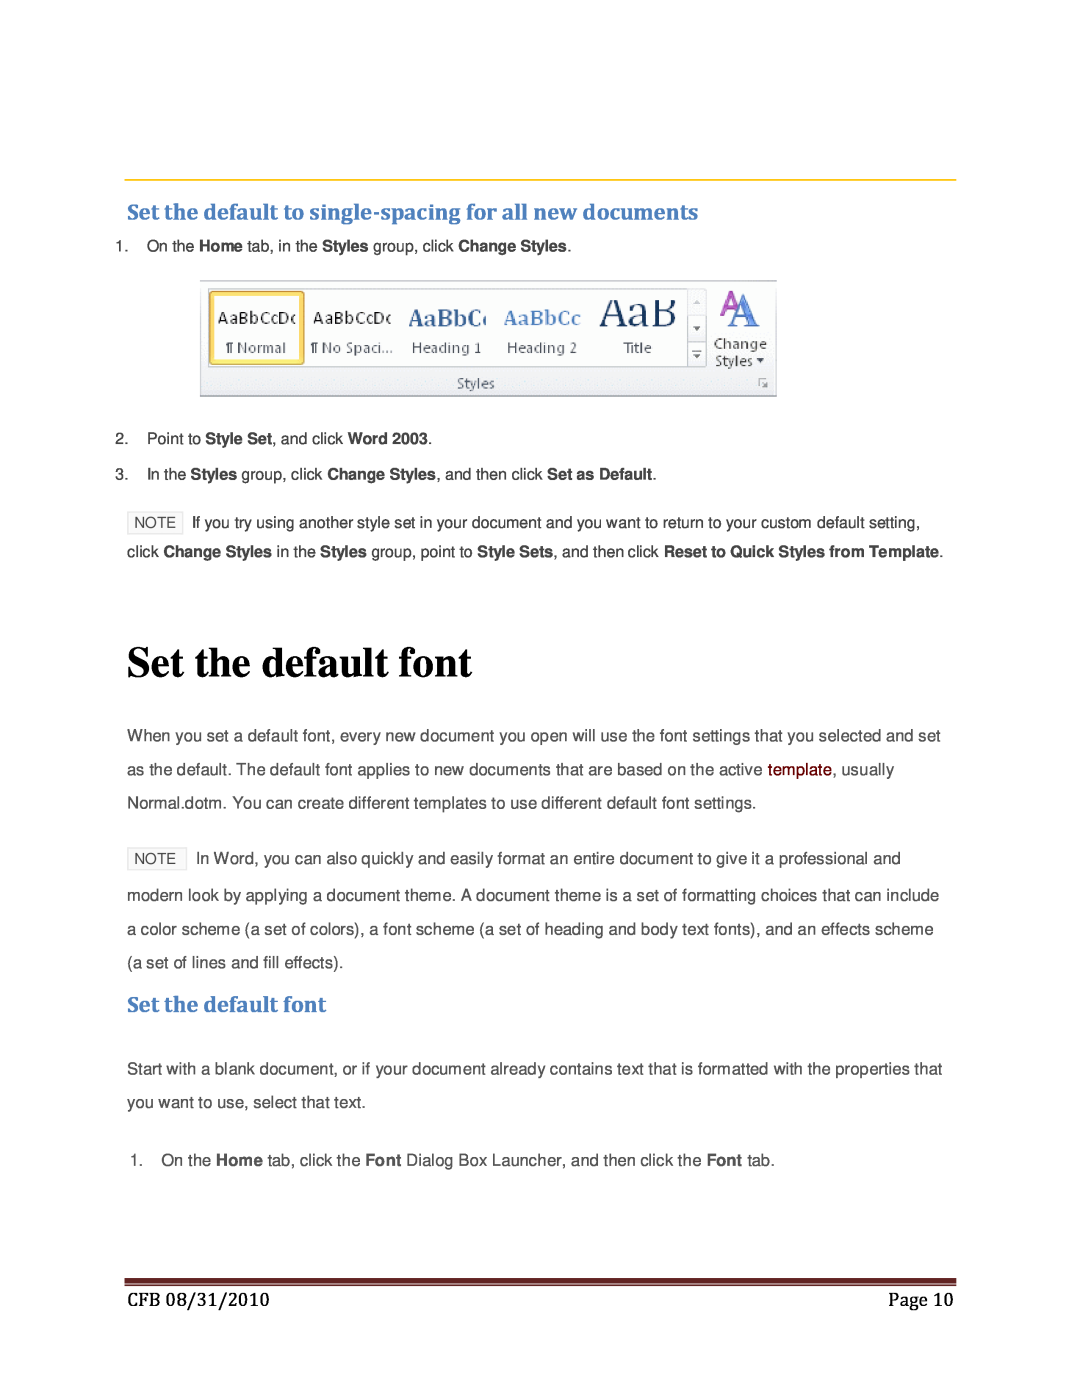 Microsoft 269-14457 Set the default font, Set the default to single-spacing for all new documents, CFB 08/31/2010, Page 